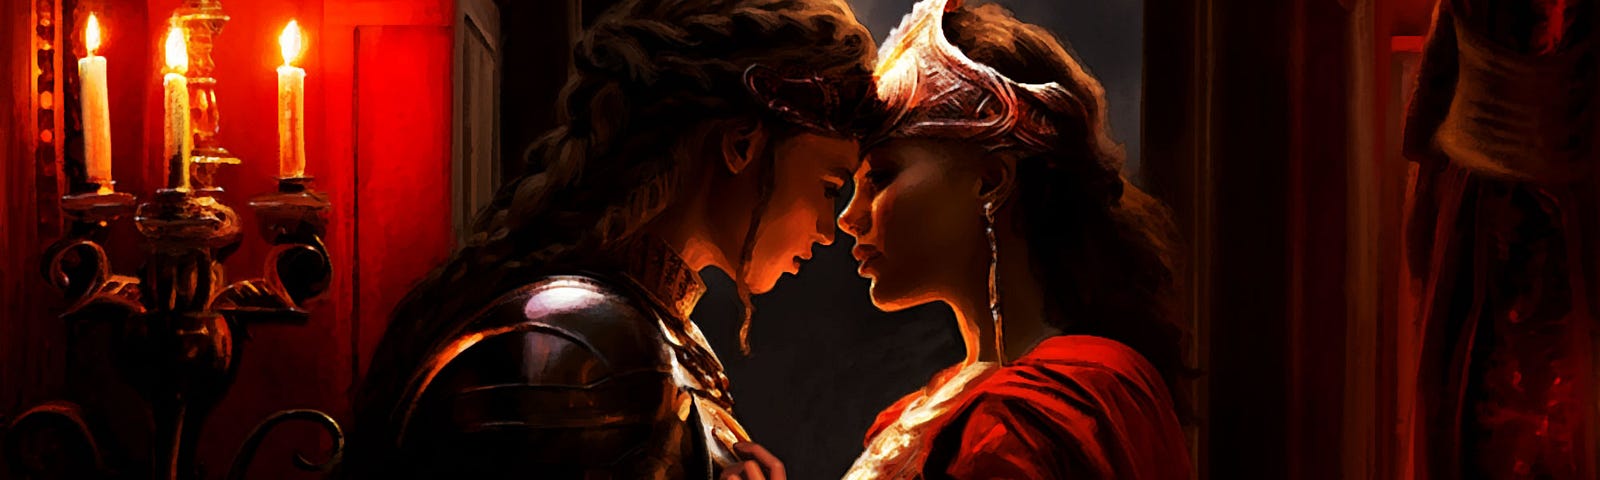 Fantasy painting of a young princess and an armored woman guard in an intimate pose in a secluded candlelit alcove with warm yellow and red light